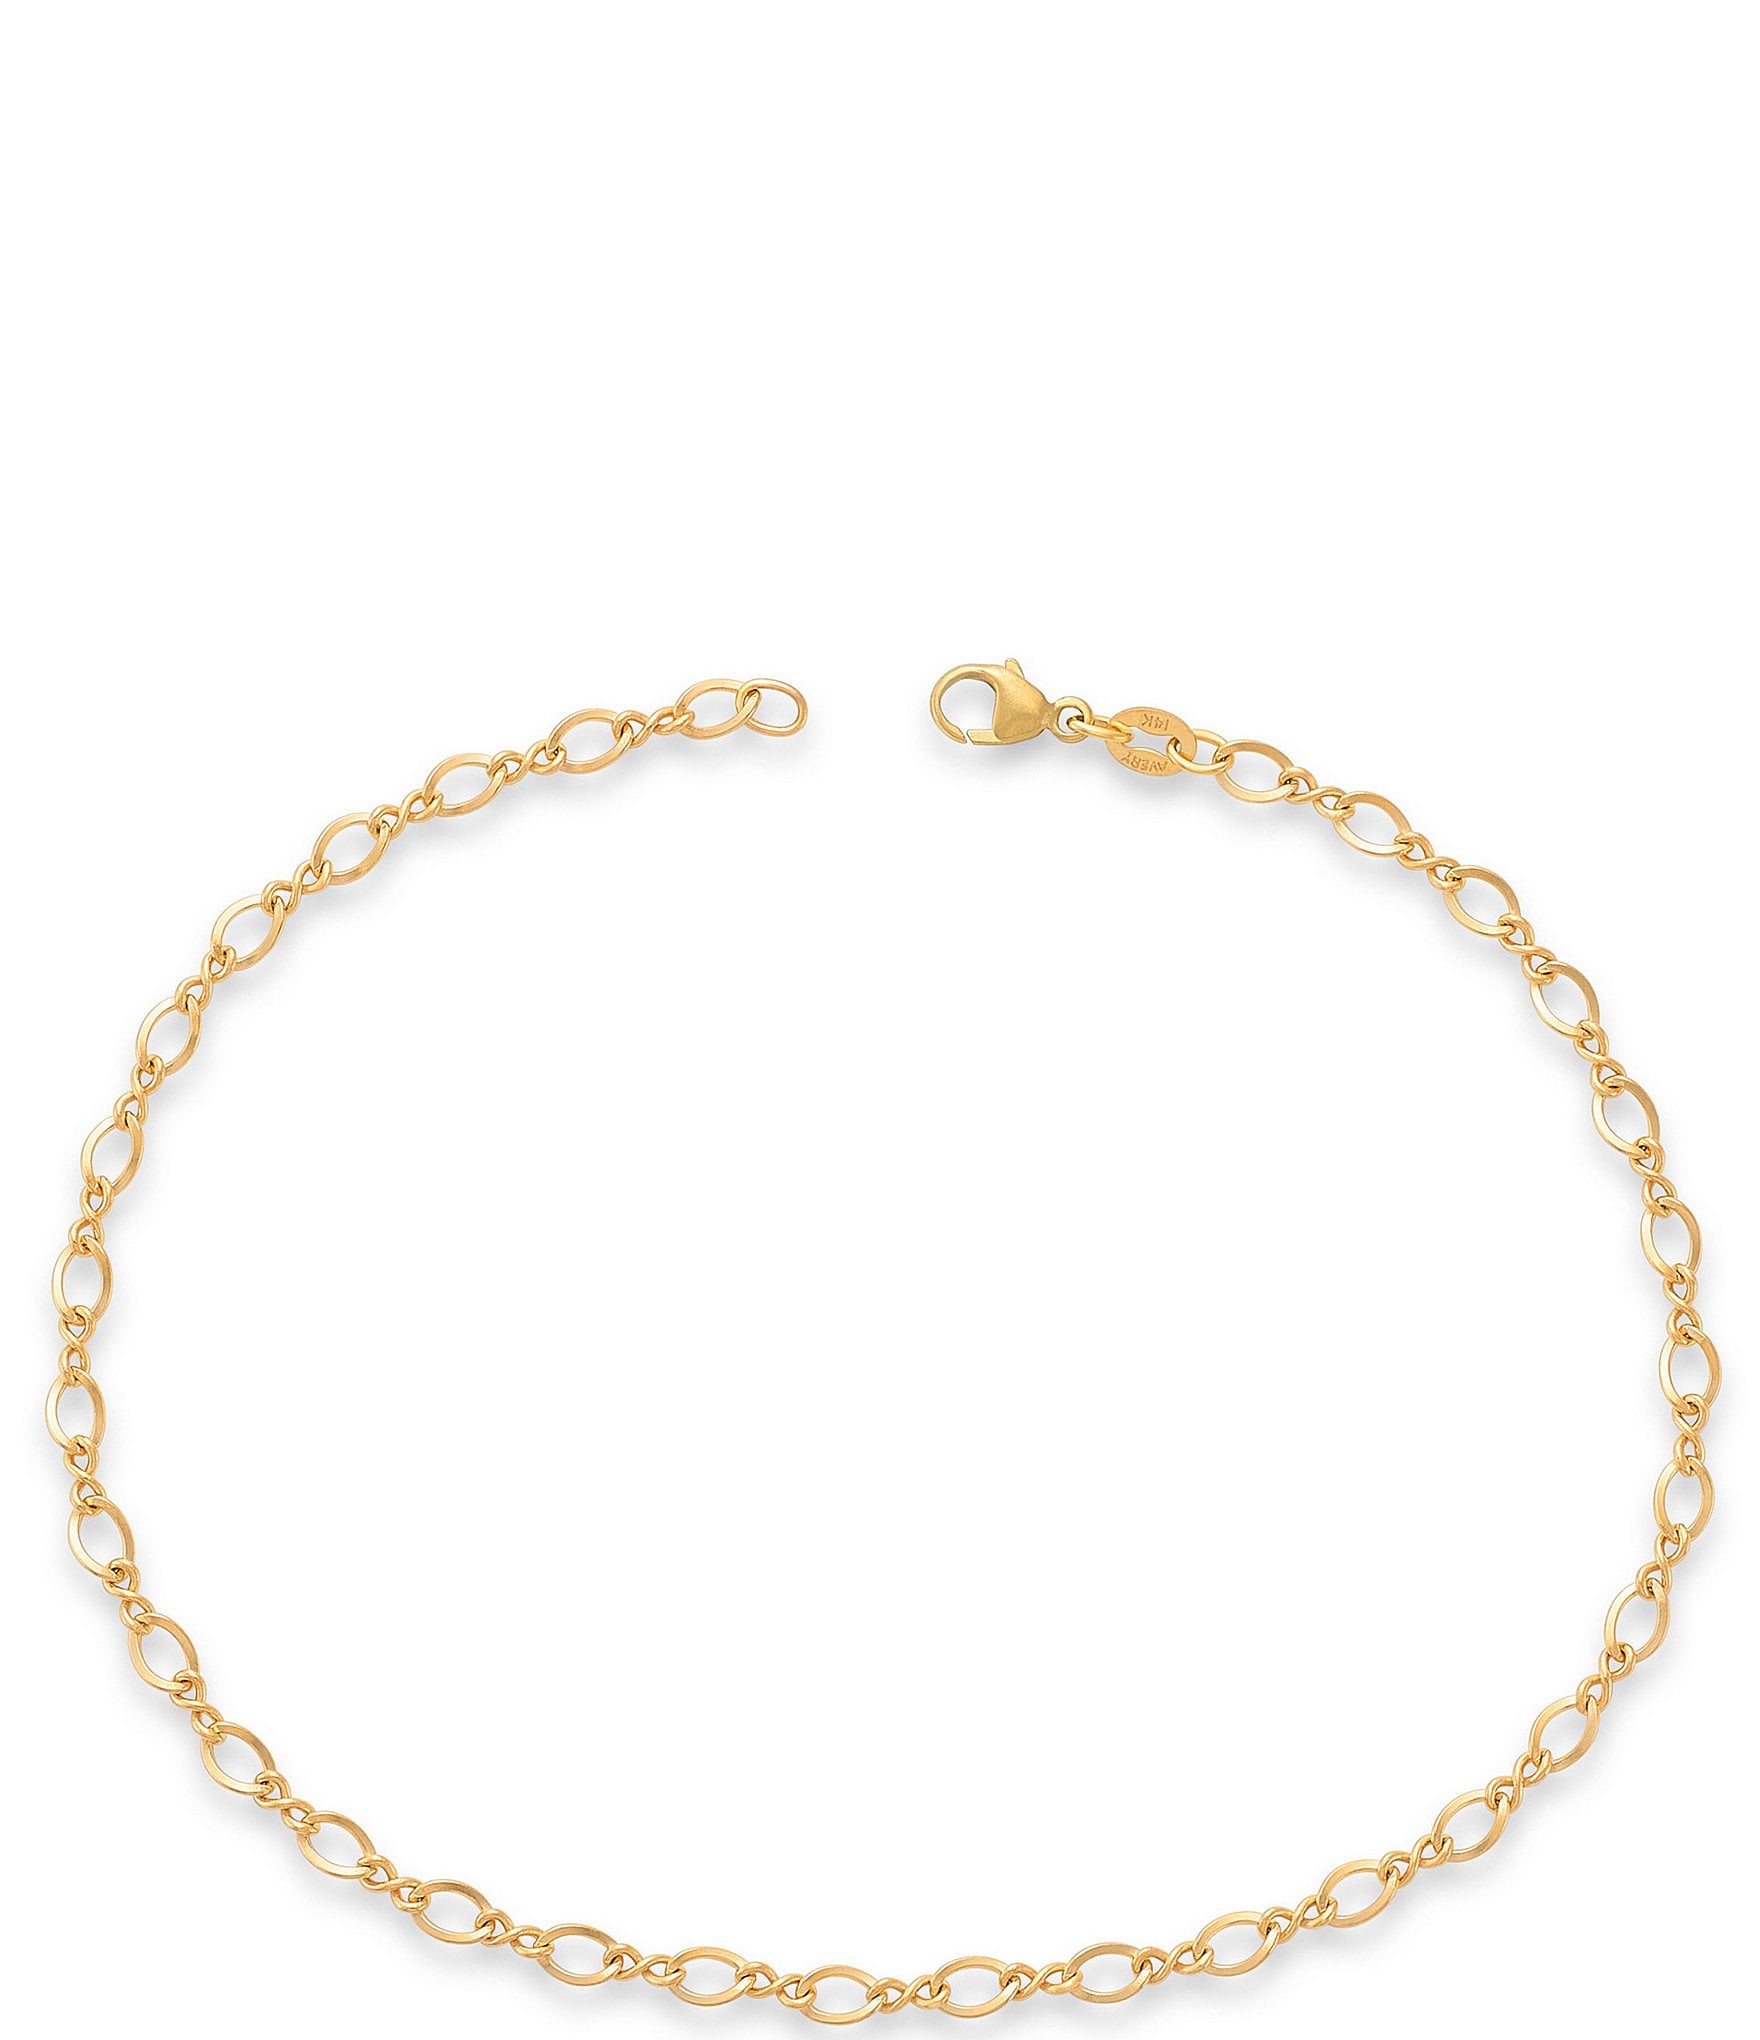 Alternating Dolphin and Oval Twist Adjustable Anklet in 14K Gold - 10